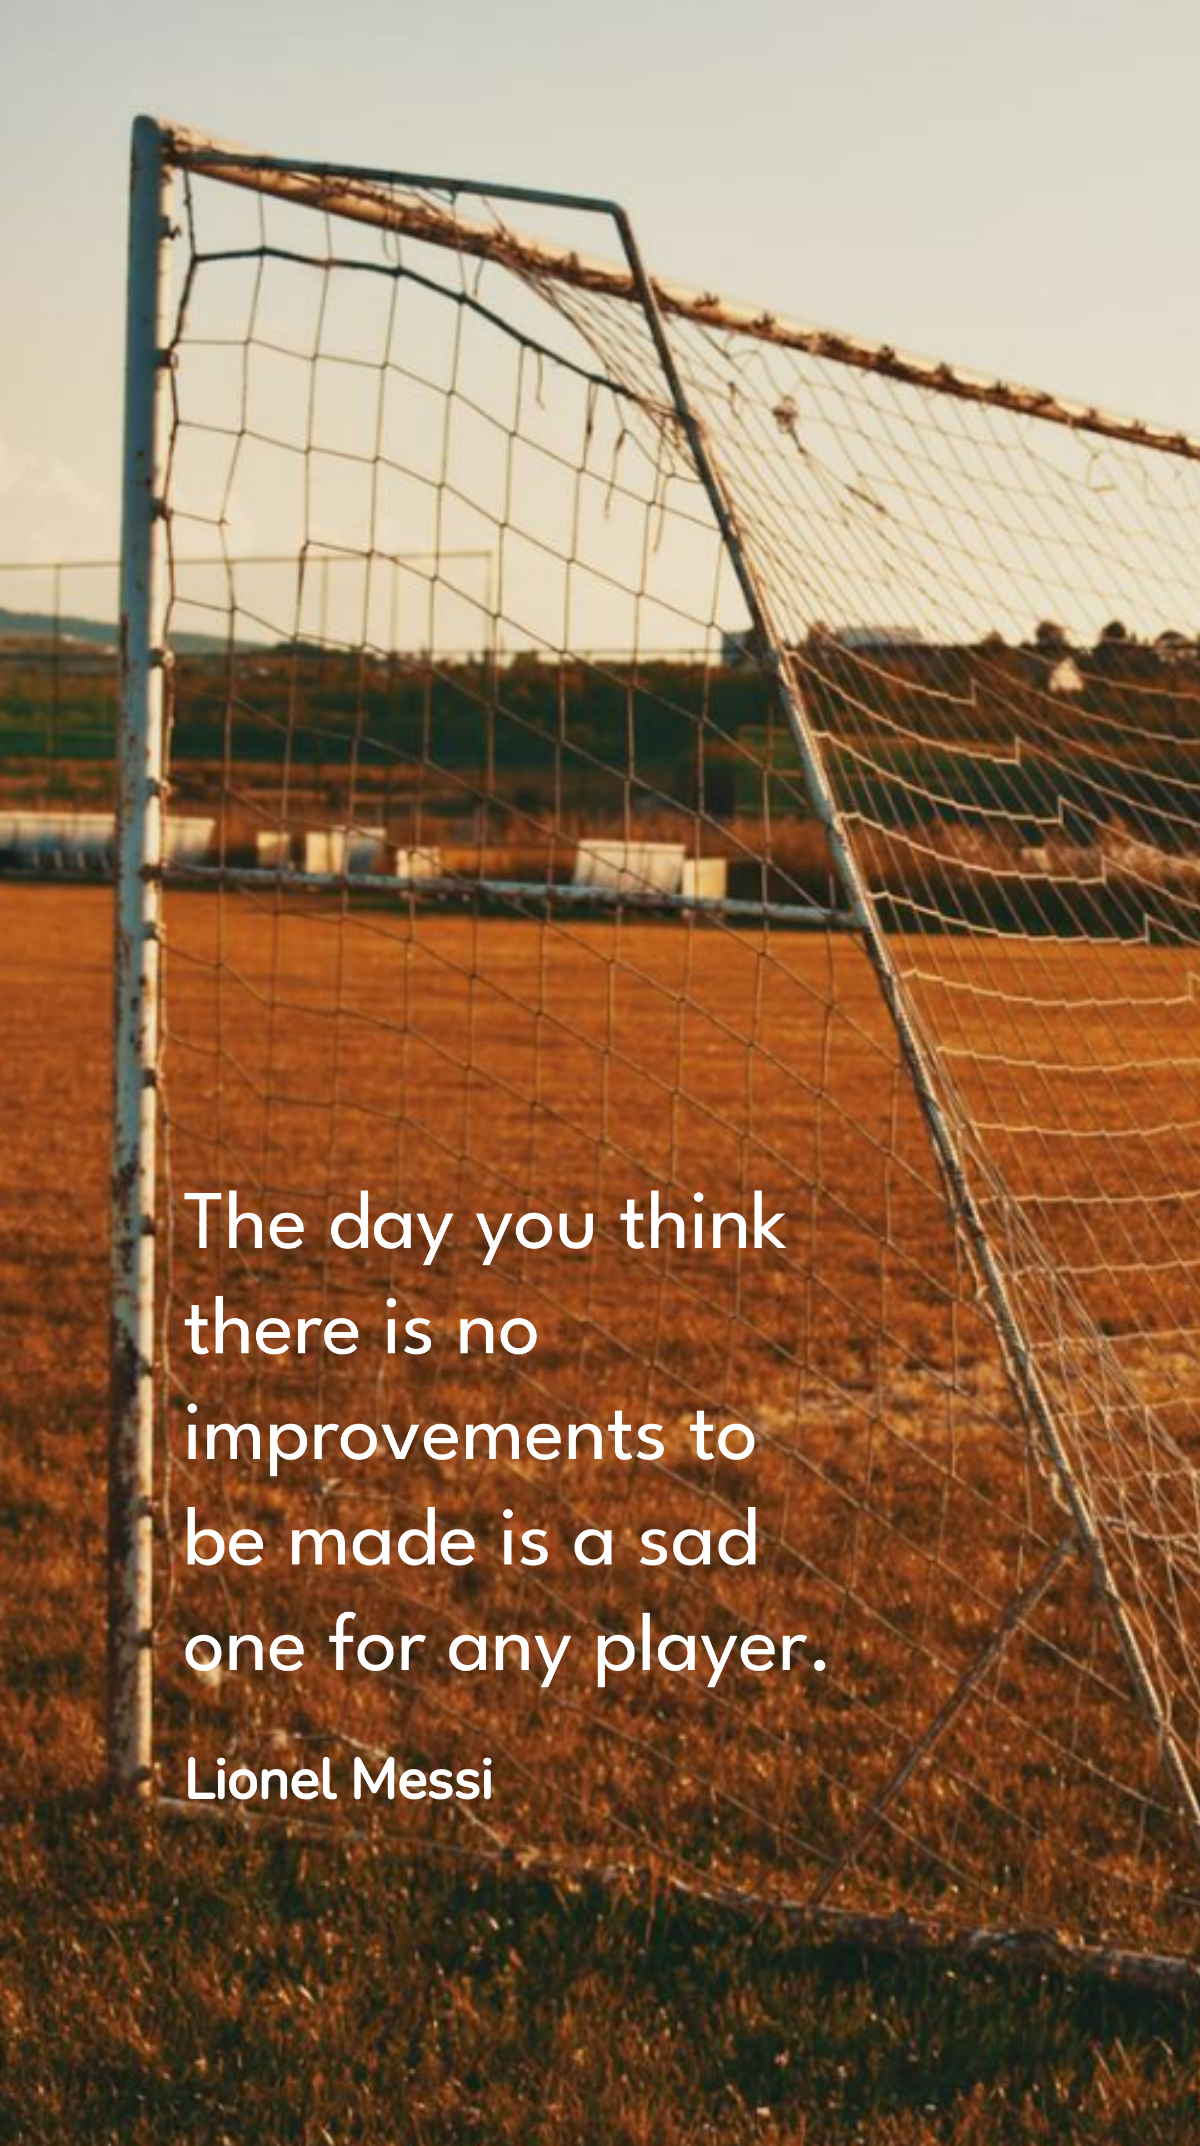 Lionel Messi - The day you think there is no improvements to be made is a sad one for any player. Template